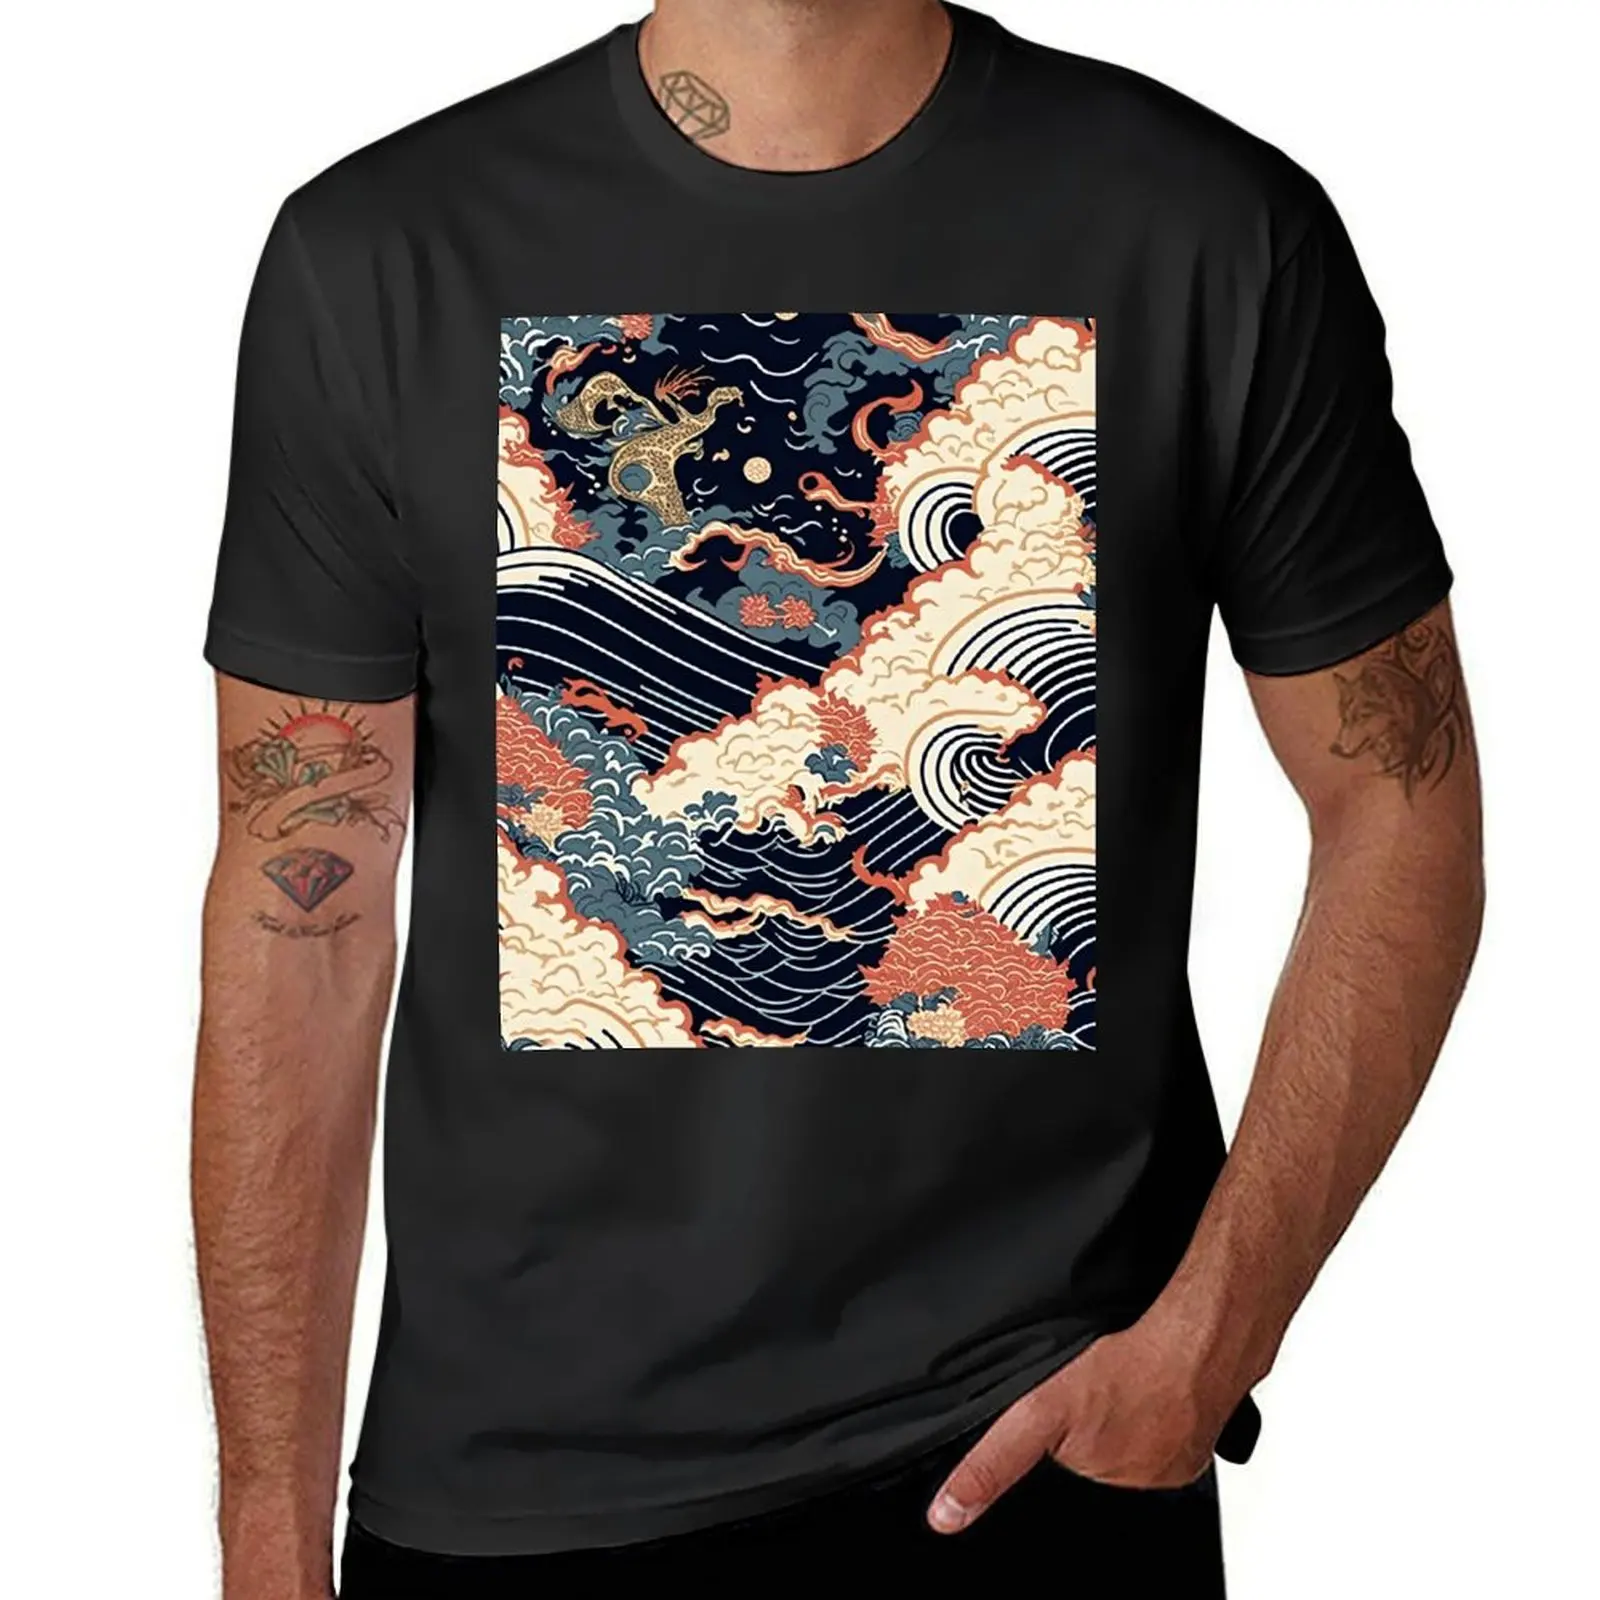 

Ukiyo-e Art Style and Japanese Culture Inspired Wallpaper Patterns T-Shirt animal prinfor boys mens funny t shirts